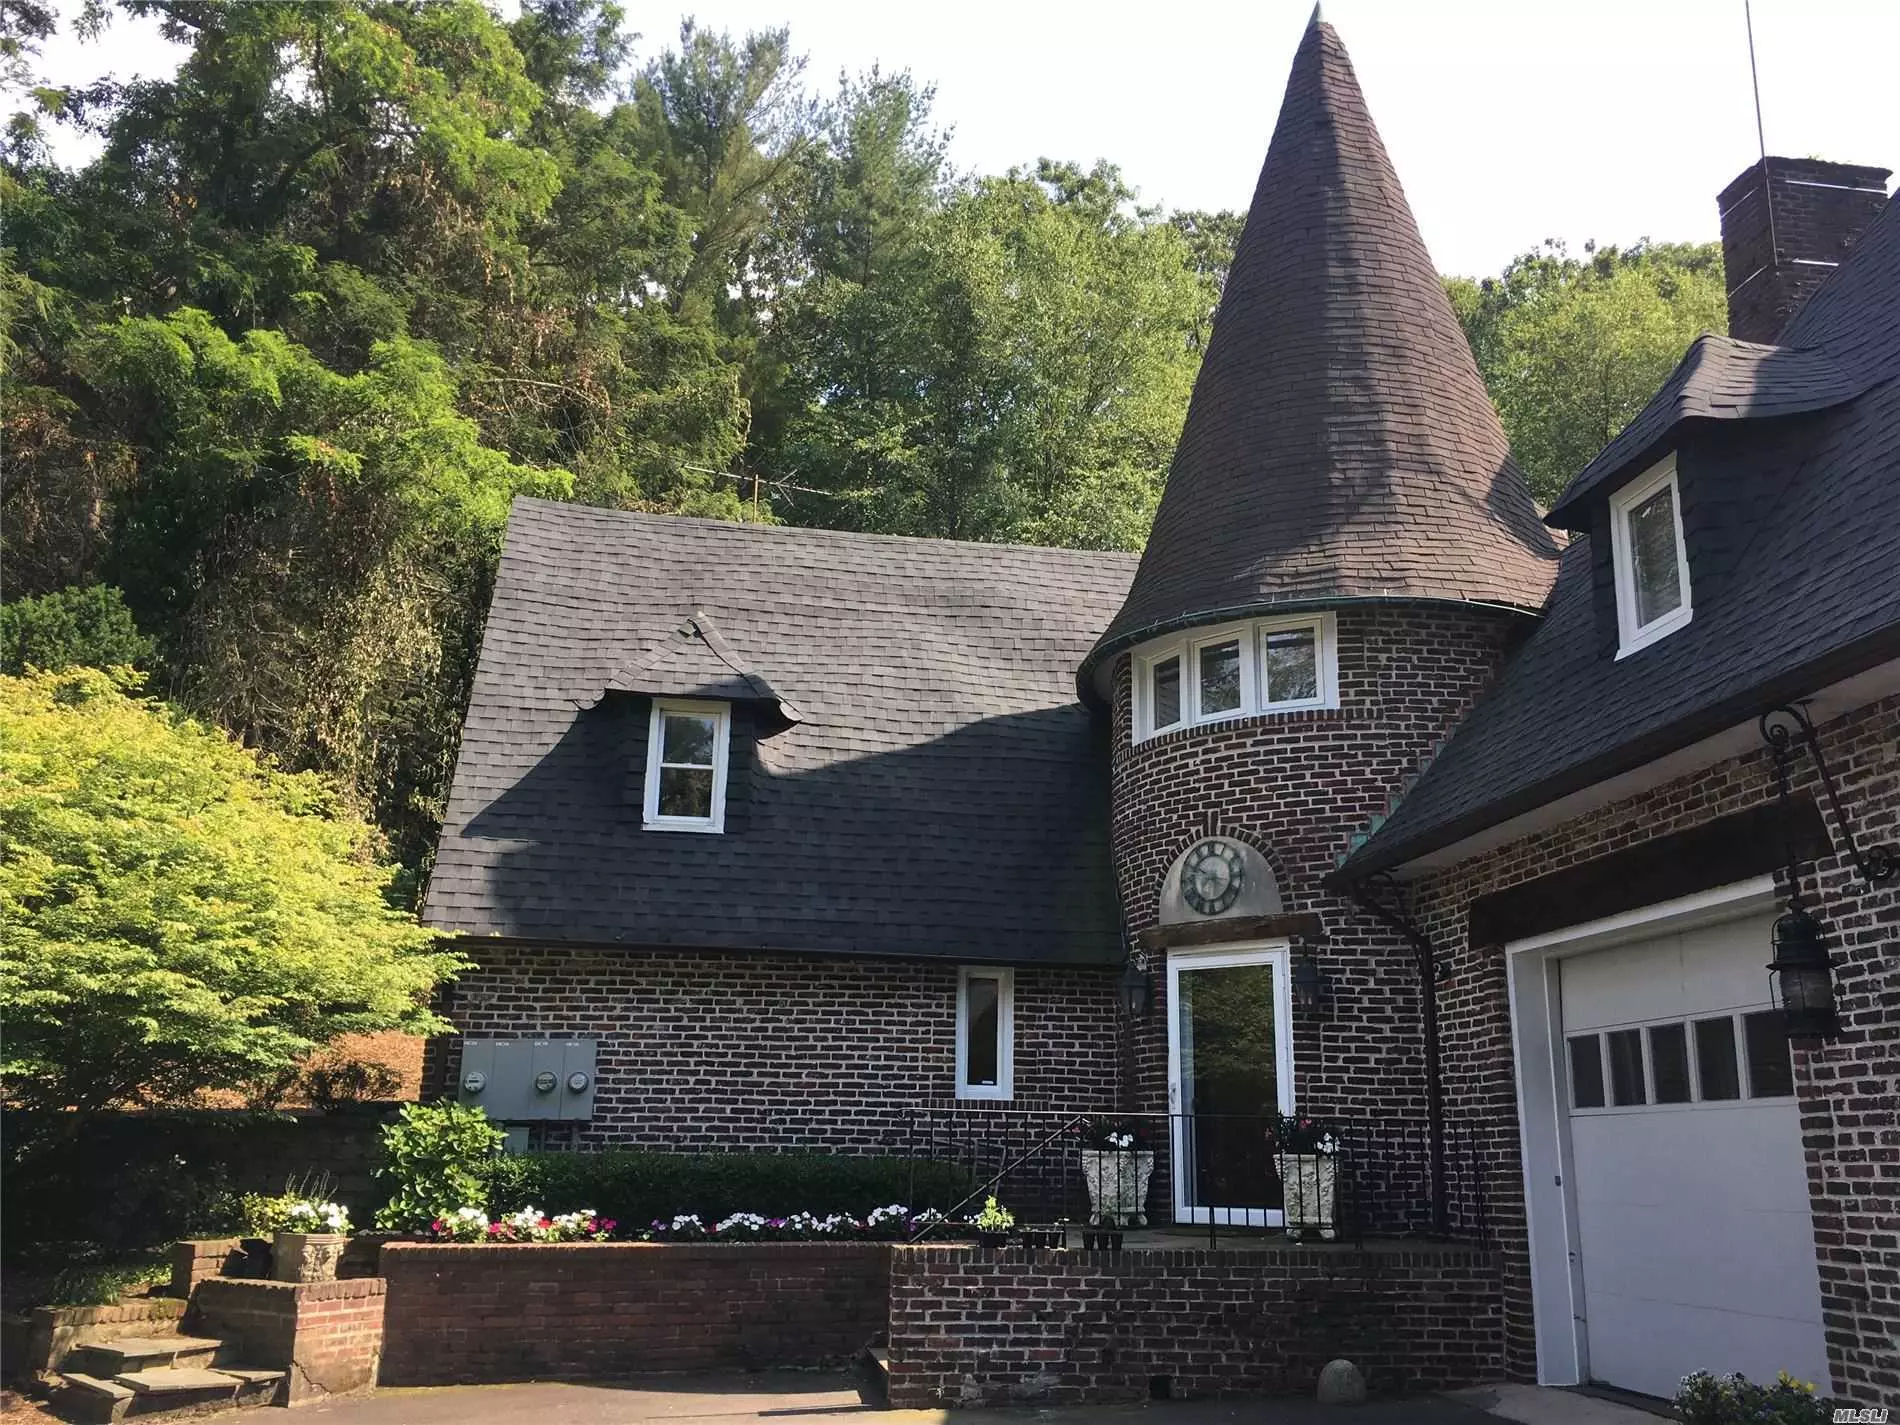 BEAUTIFUL HISTORIC COTTAGE ON PRIVATE SERENE ESTATE WITH A POND VIEW. FOUR BEDROOM, 3 FULL BATH AND 1/2 BATH, UPDATED KITCHEN, SUNROOM, LIVING ROOM, FLOORS UPDATED, NEW WINDOWS, LAUNDRY AREA, PRIVATE ENTRANCE , PATIO, AND PLENTY OF PARKING, DETACHED TWO CAR GARAGE .